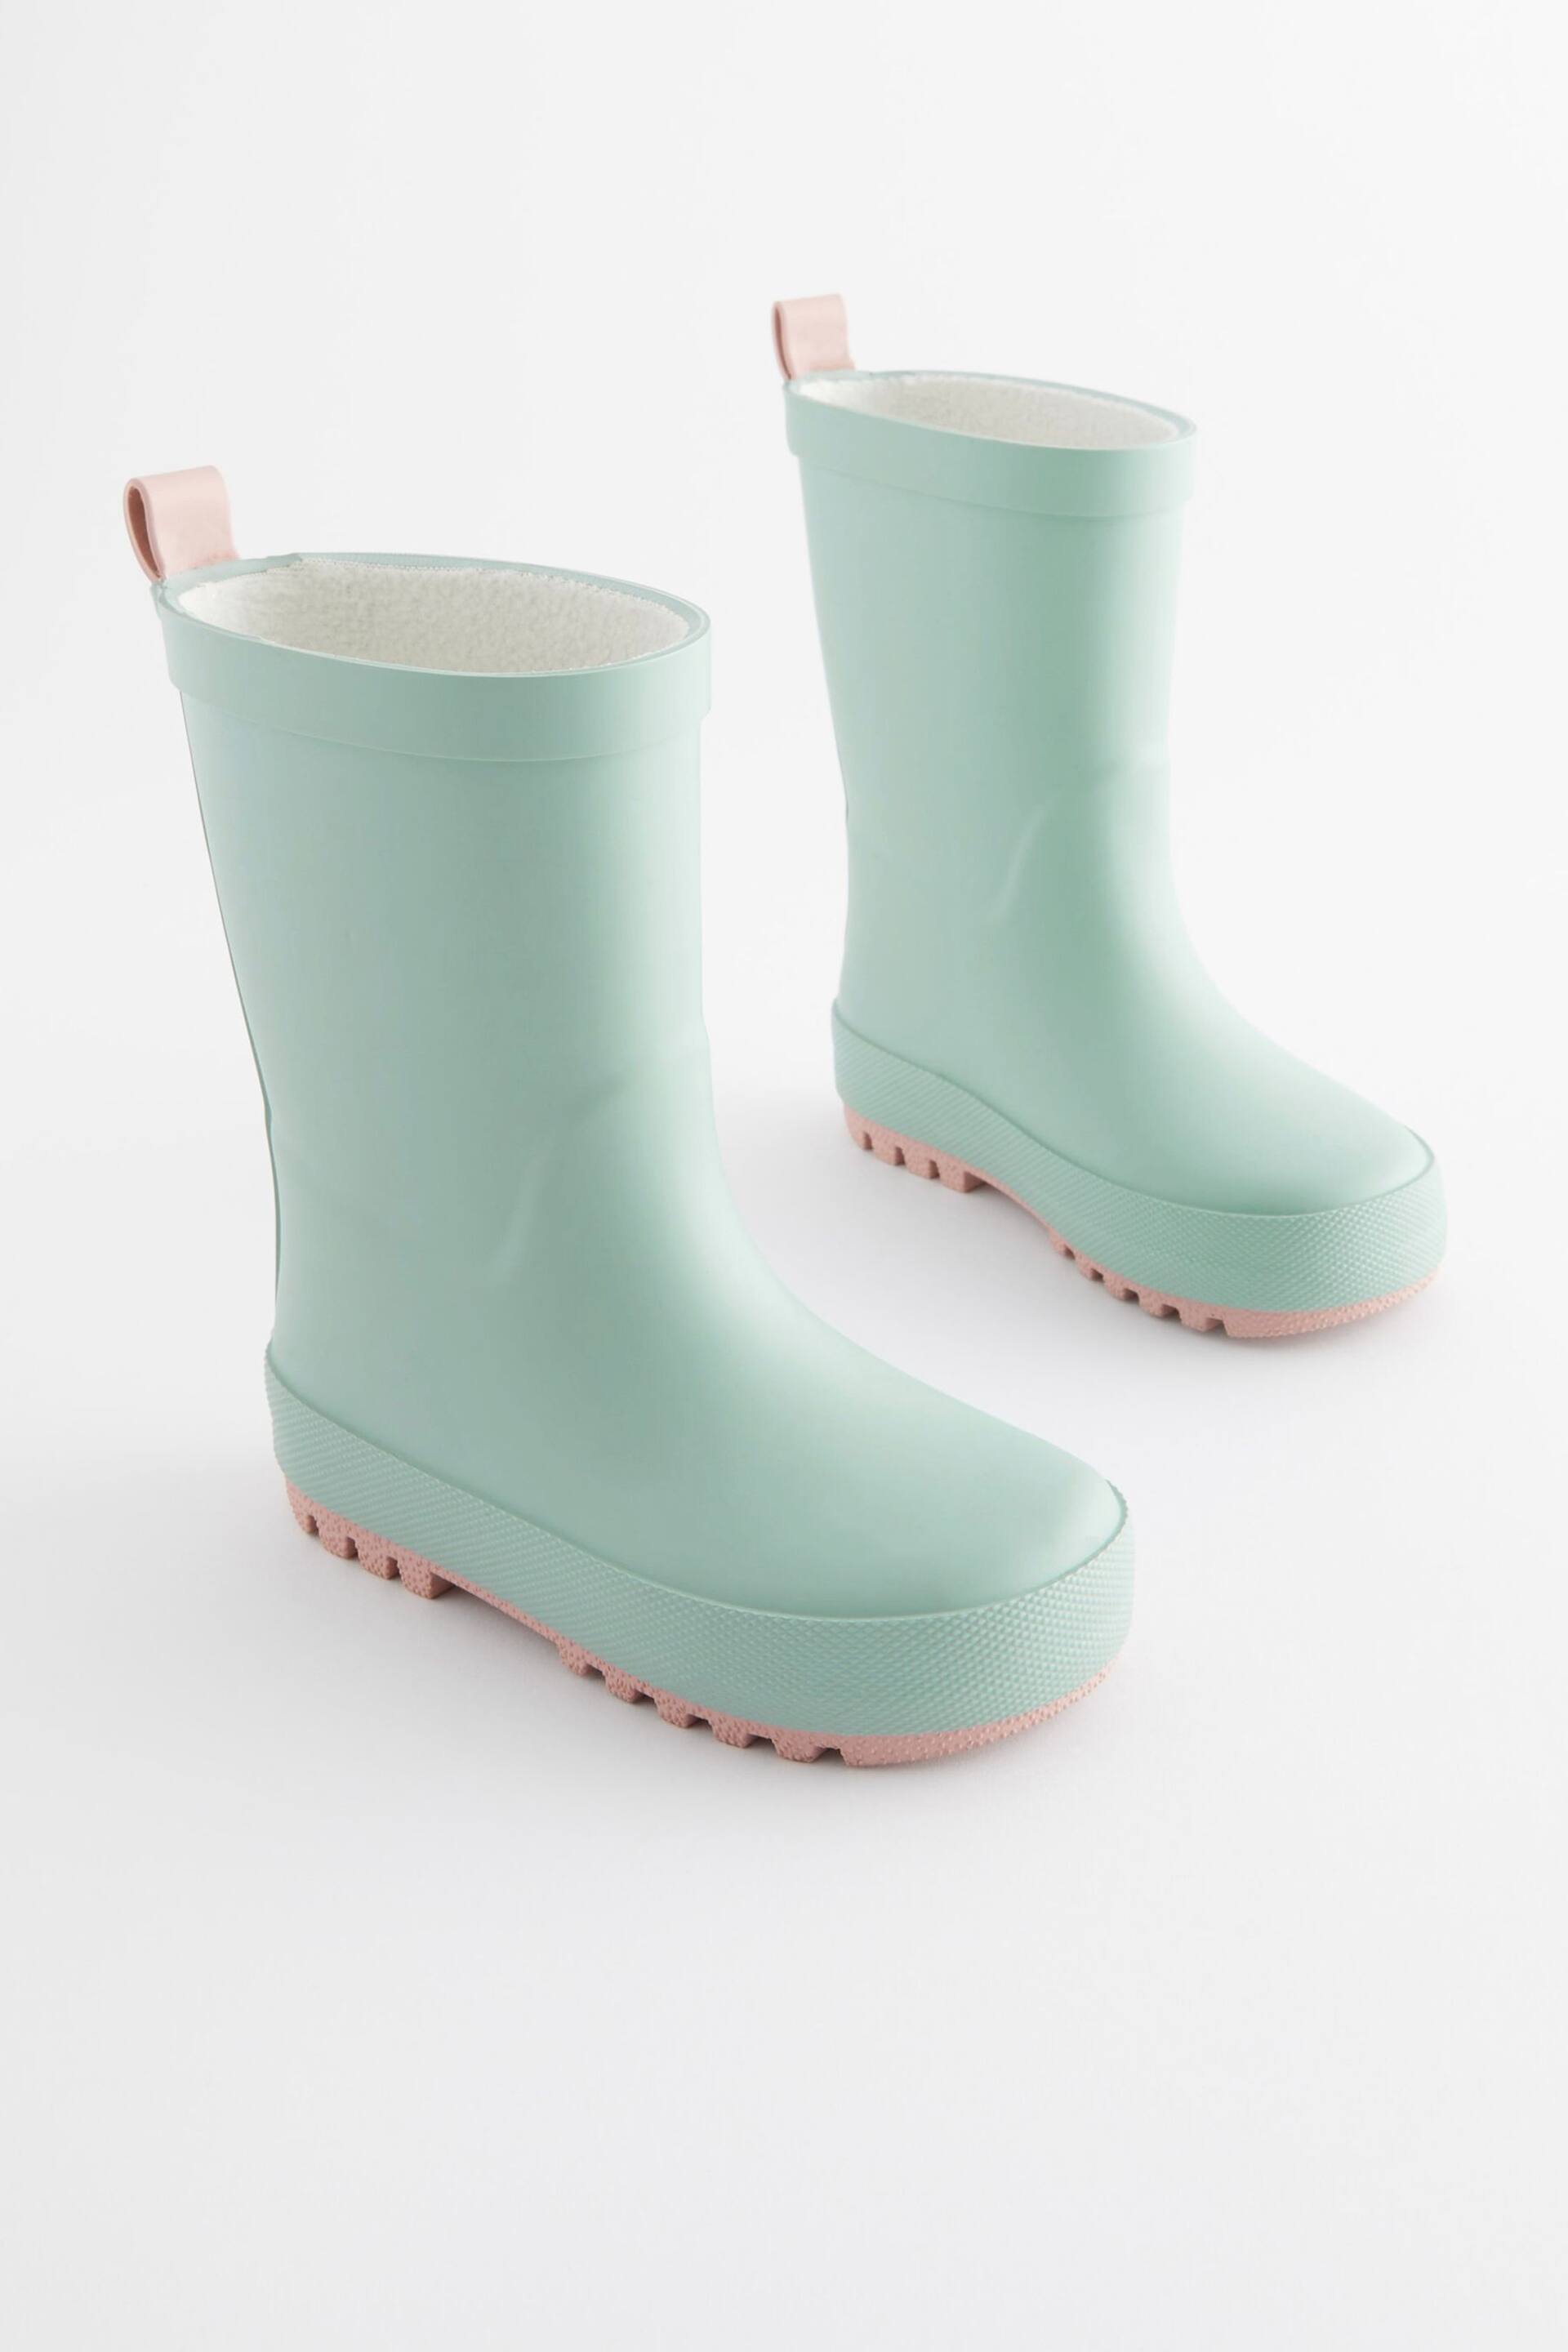 Sage Green Rubber Wellies - Image 1 of 5